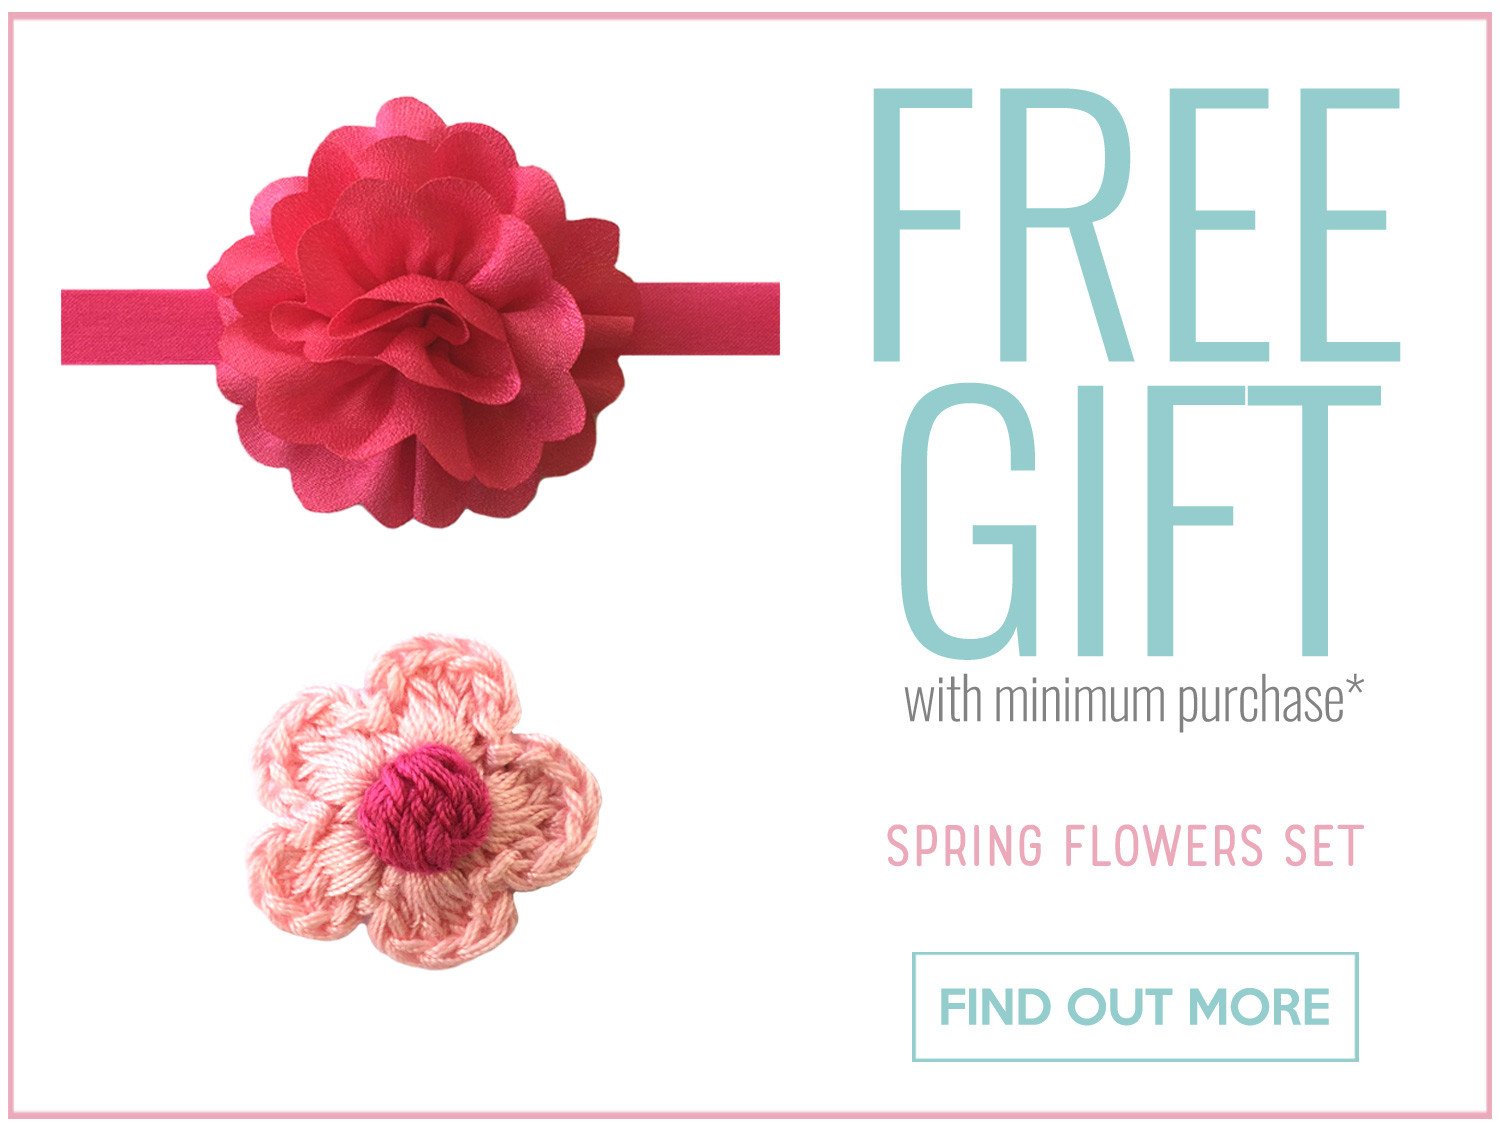 Spring Flowers Accessories Set FREE with minimum purchase